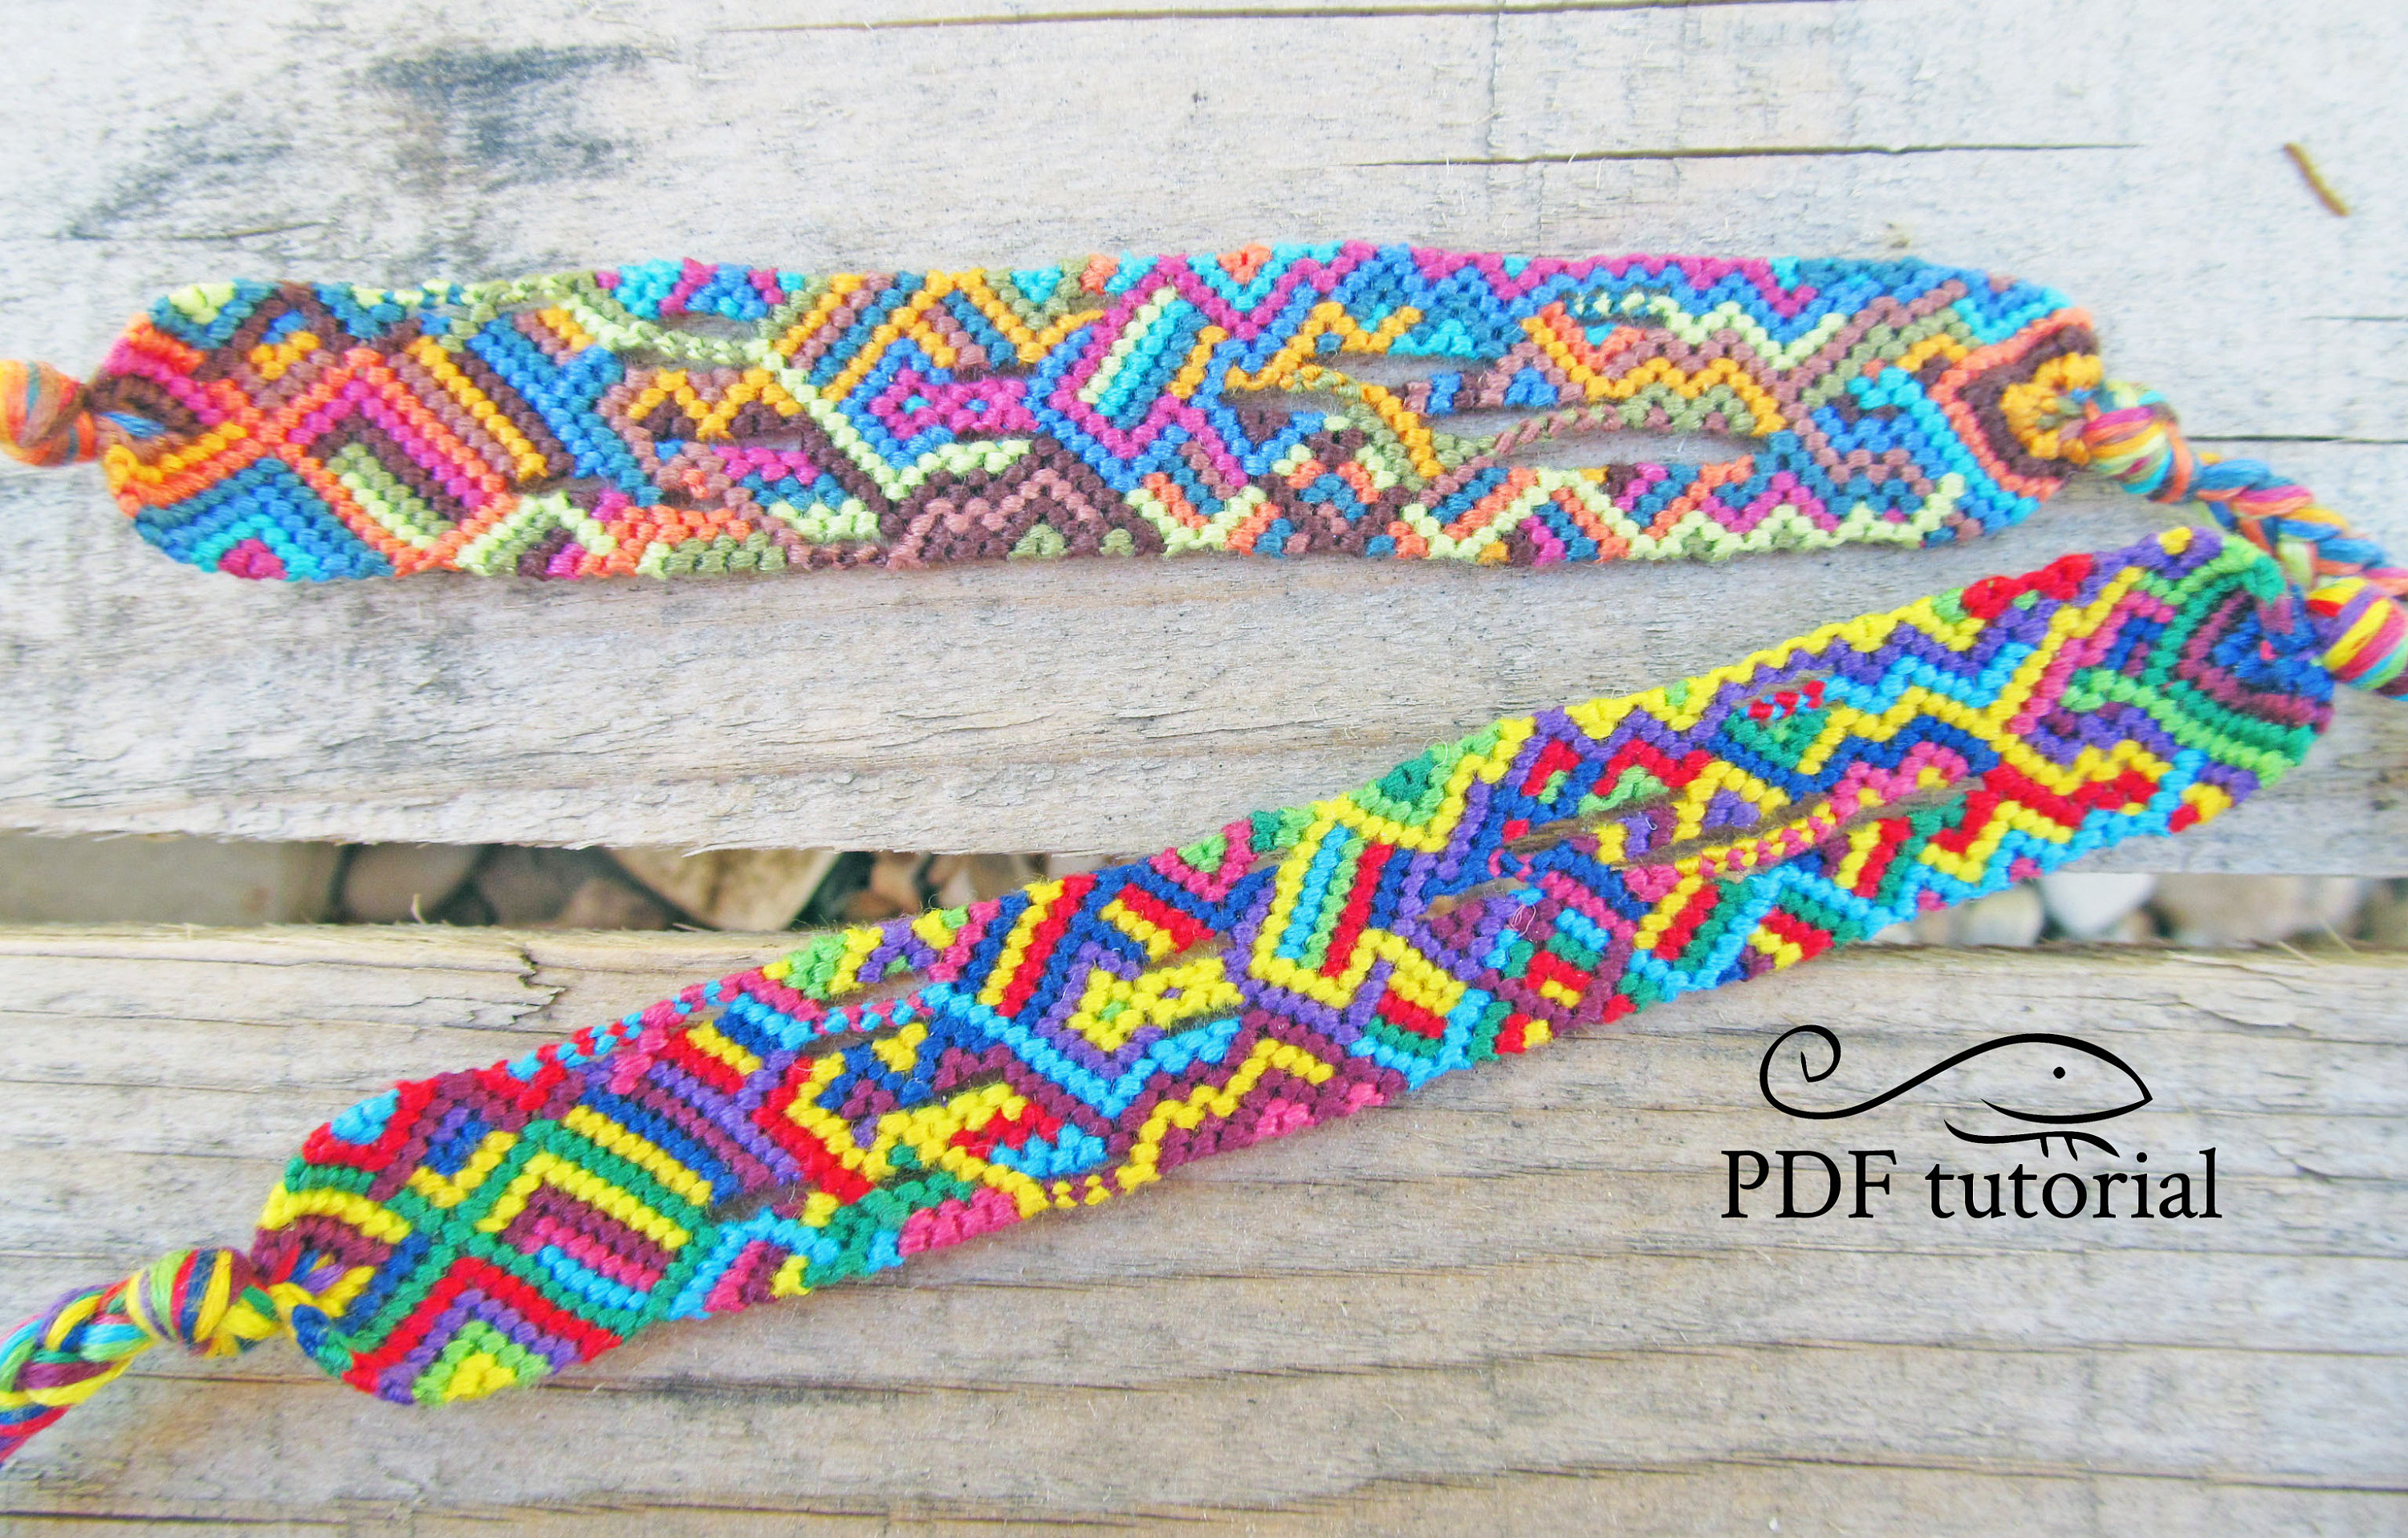 Embroidery Floss Bracelet Patterns Friendship Bracelet Pattern Macrame Bracelet Pattern Colorful Jungle Downloadable Pdf Tutorial Knotted